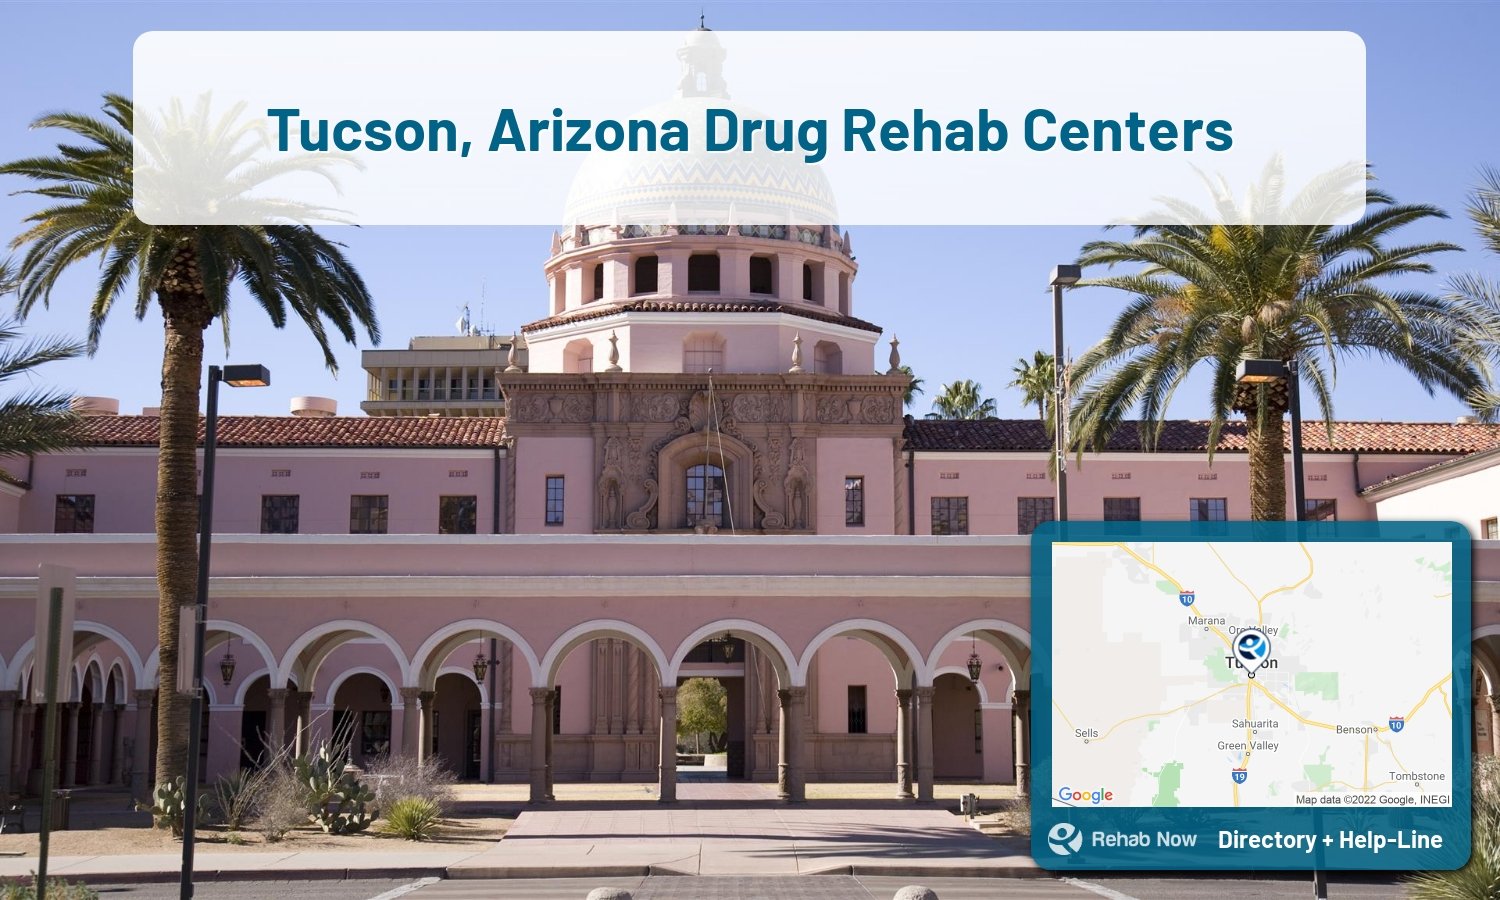 Tucson, AZ Treatment Centers. Find drug rehab in Tucson, Arizona, or detox and treatment programs. Get the right help now!